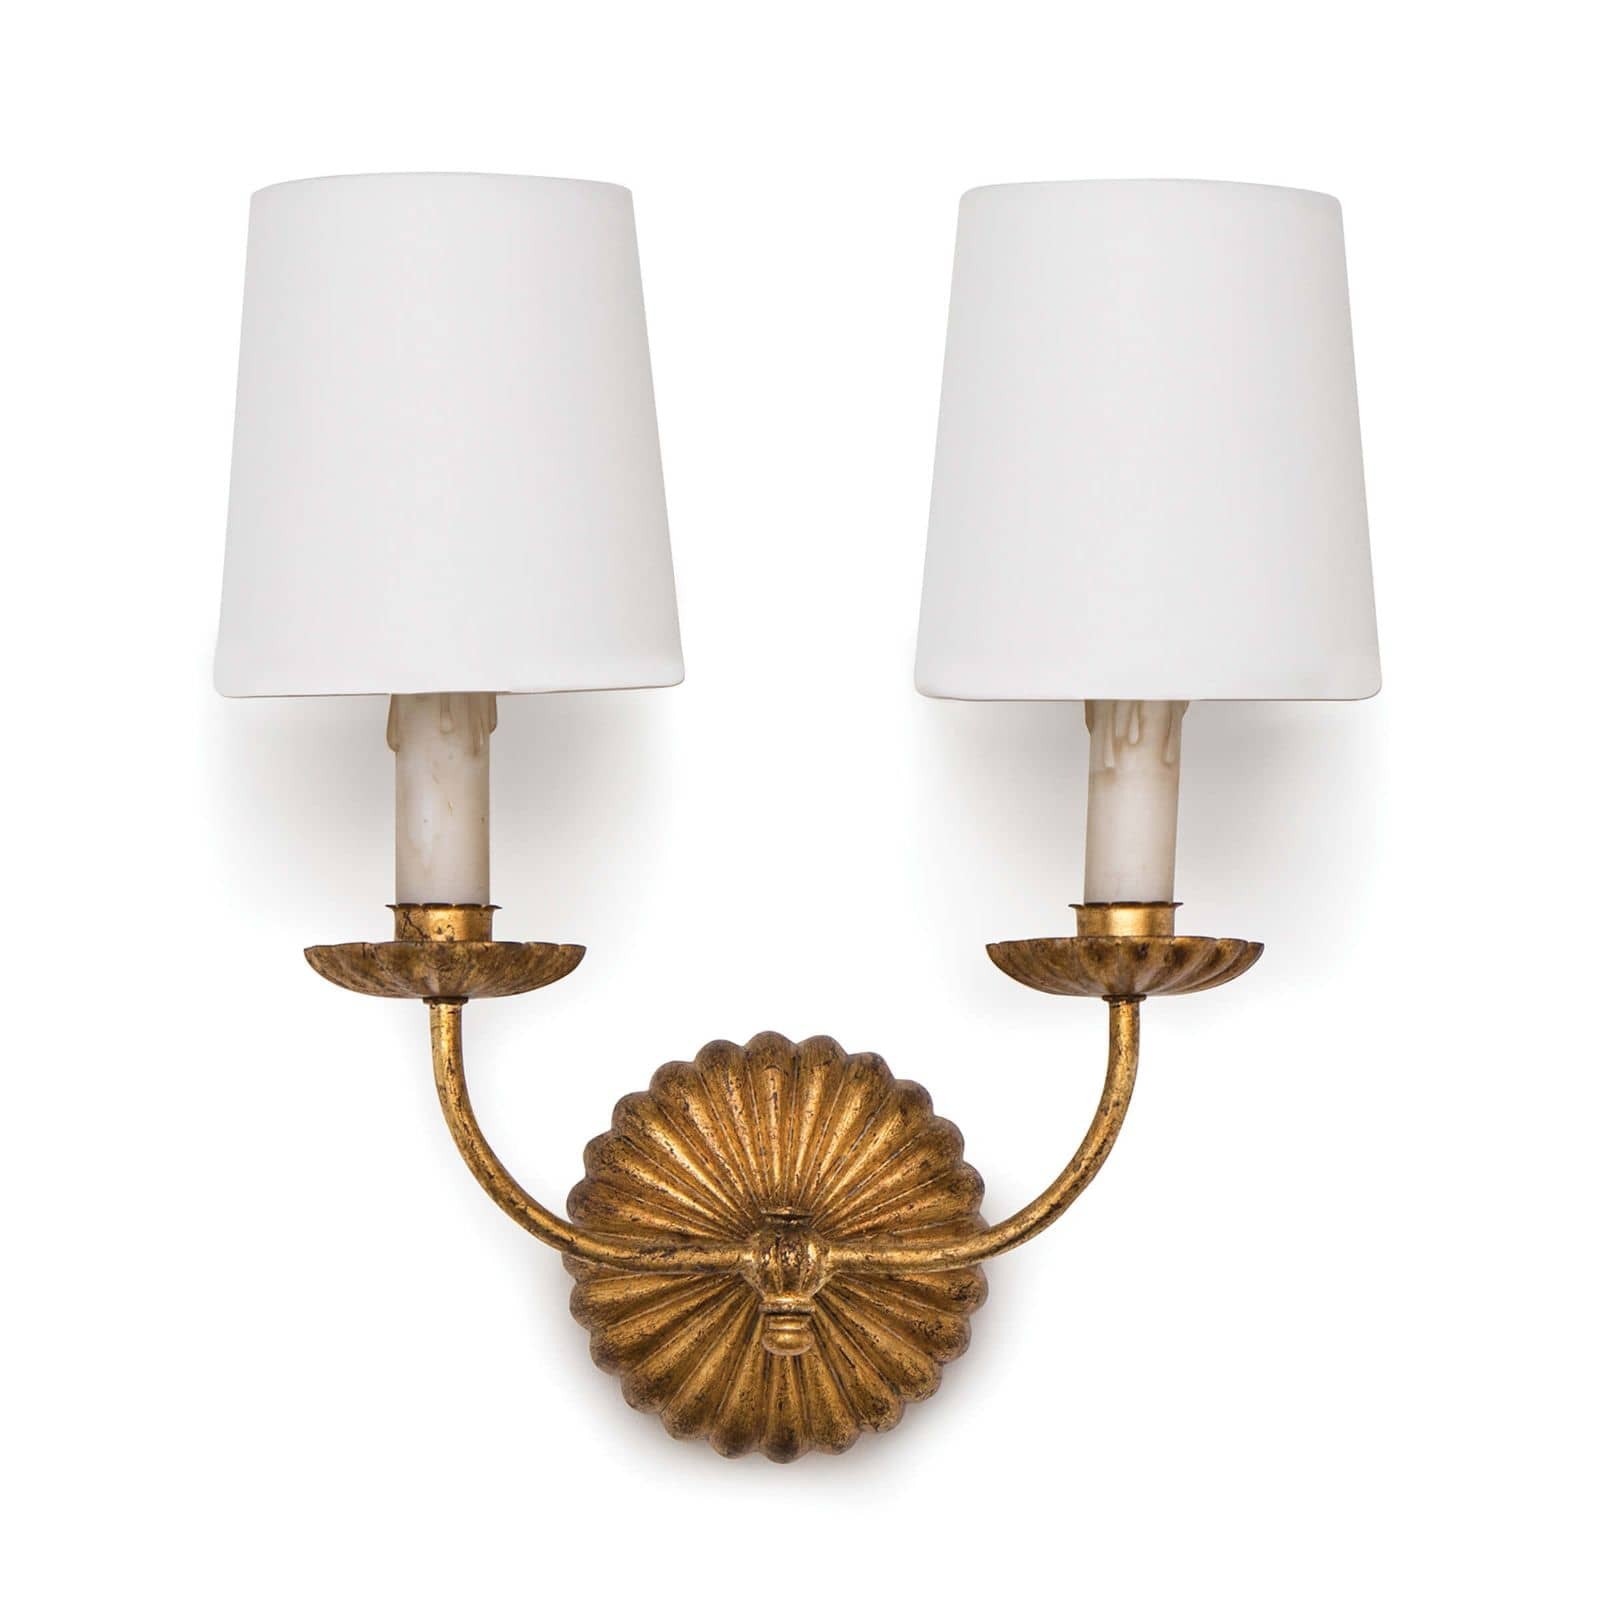 This Clove Double Sconce features antique gold leaf finish, with two antique-inspired candle holding crisp, modern shades -- a unique sconce for any hallway, living room, or dining room.   Overall Dimensions: 13.75"w x 7.5"d x 15.75"h